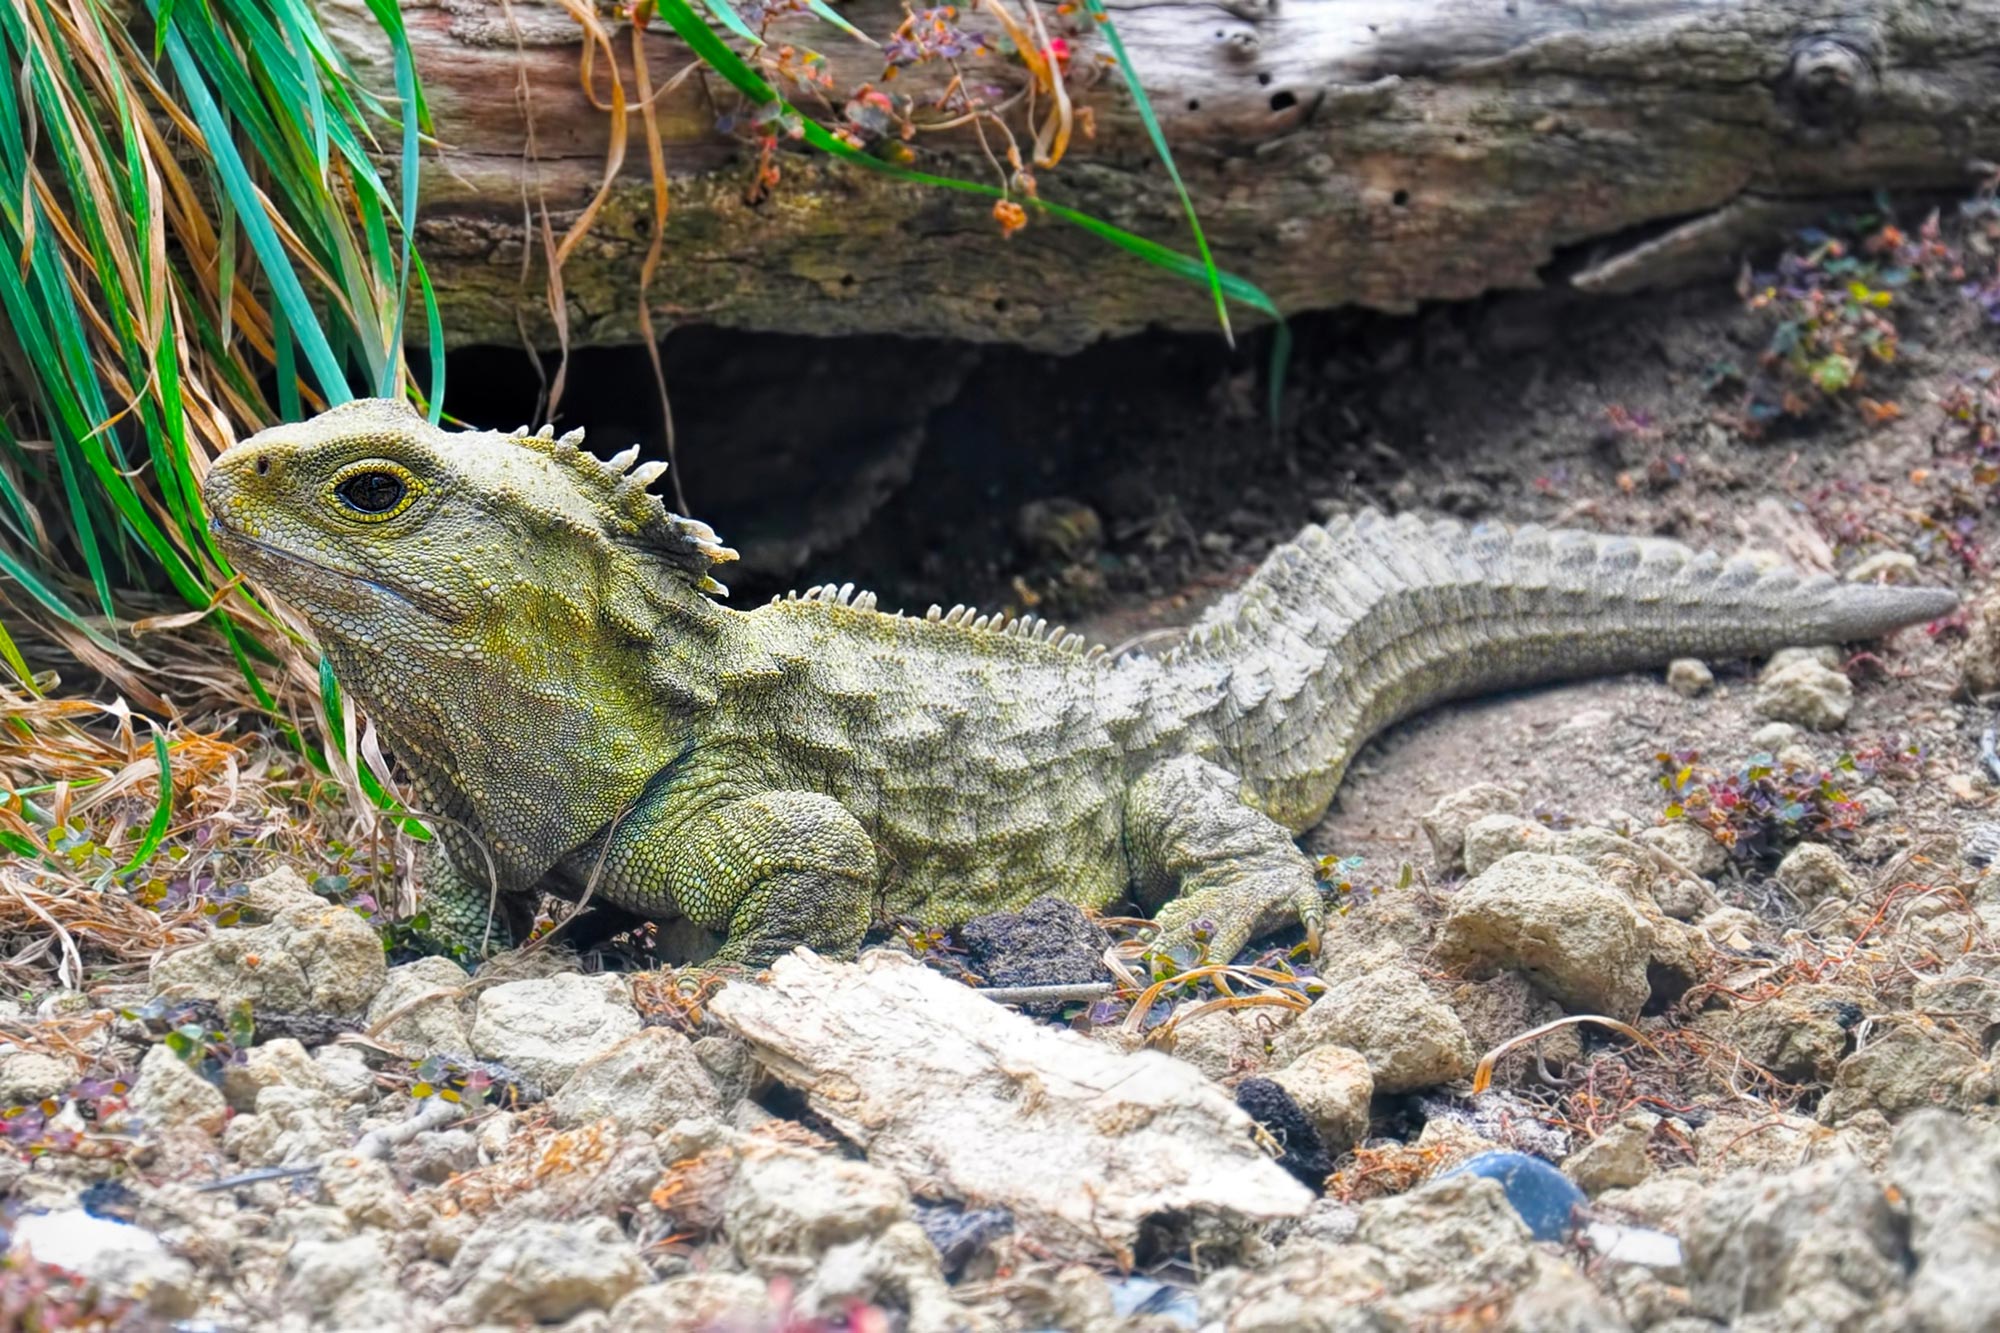 Urgent Support Needed: One in Five Reptile Species Face Extinction